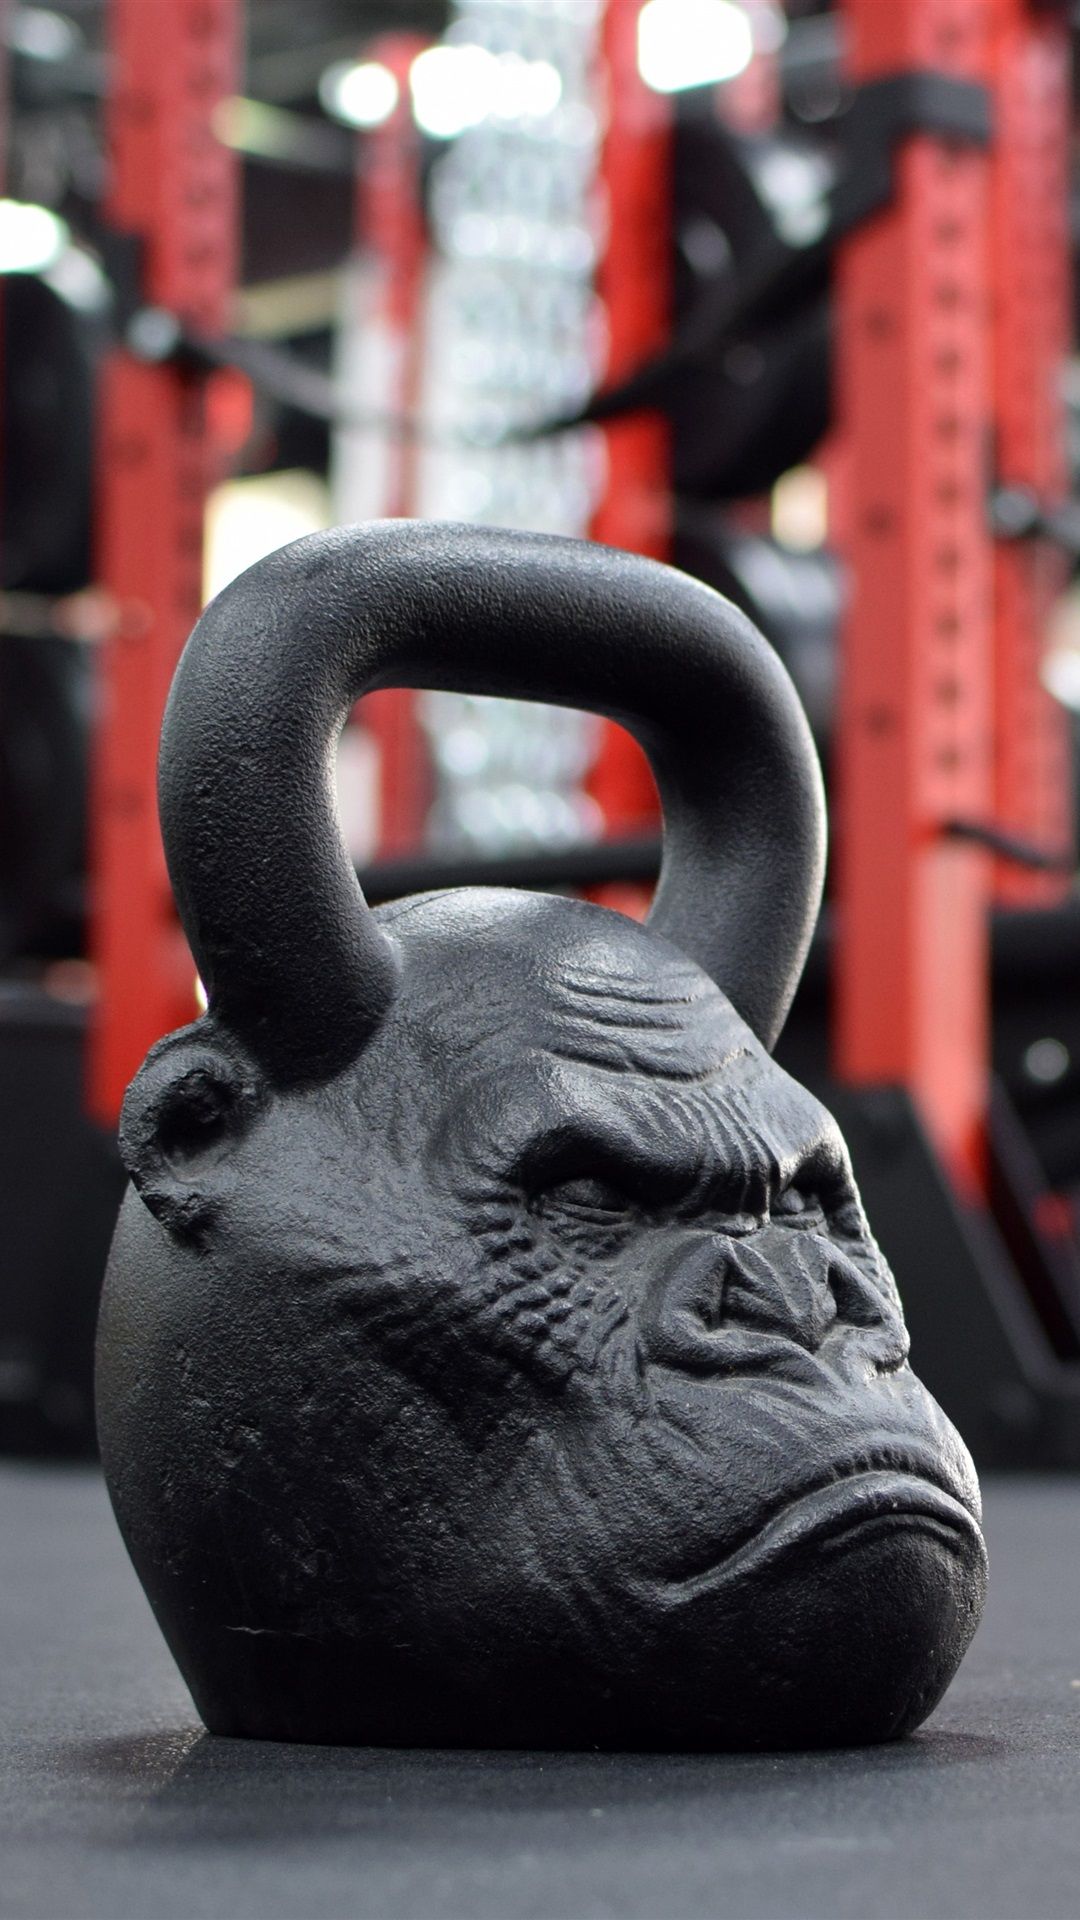 Monkey Head Dumbbell, Gym 1125x2436 IPhone 11 Pro XS X Wallpaper, Background, Picture, Image